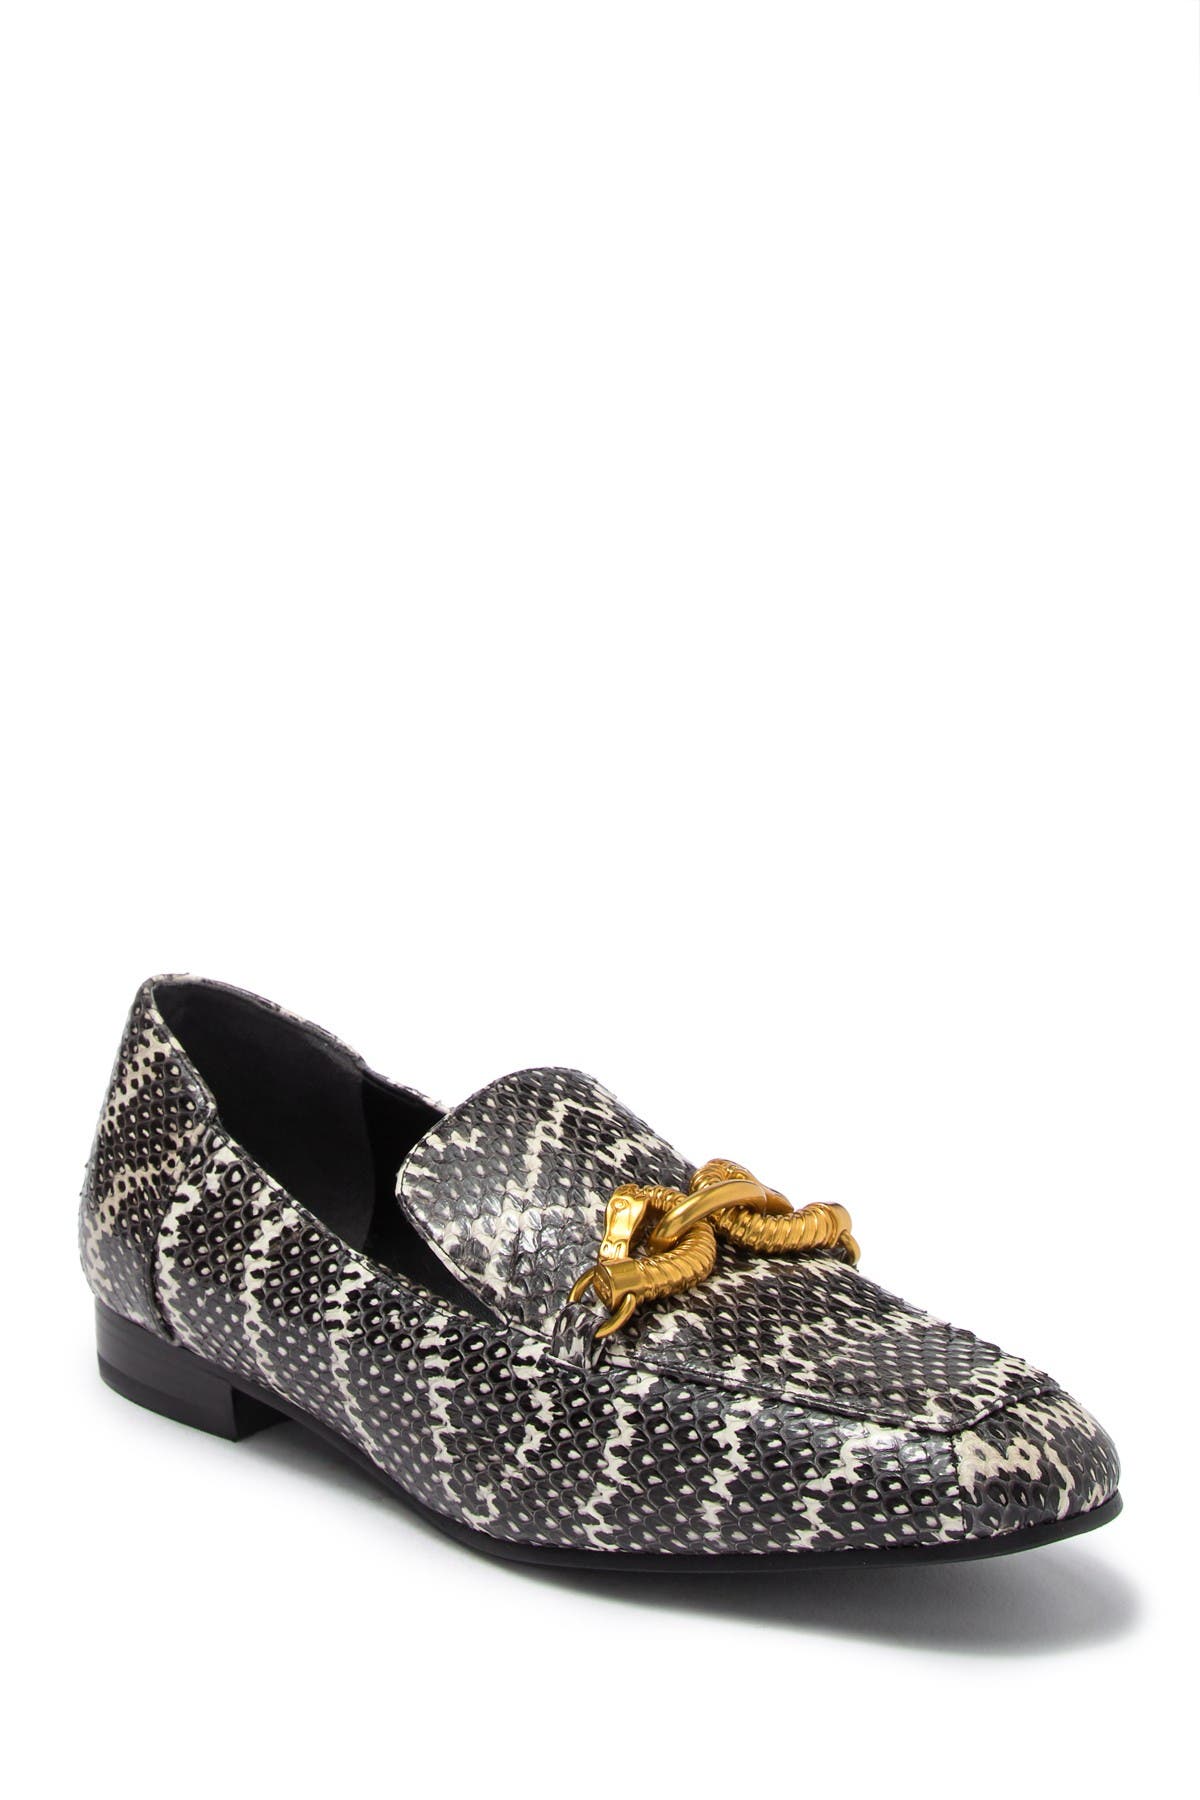 real snakeskin loafers